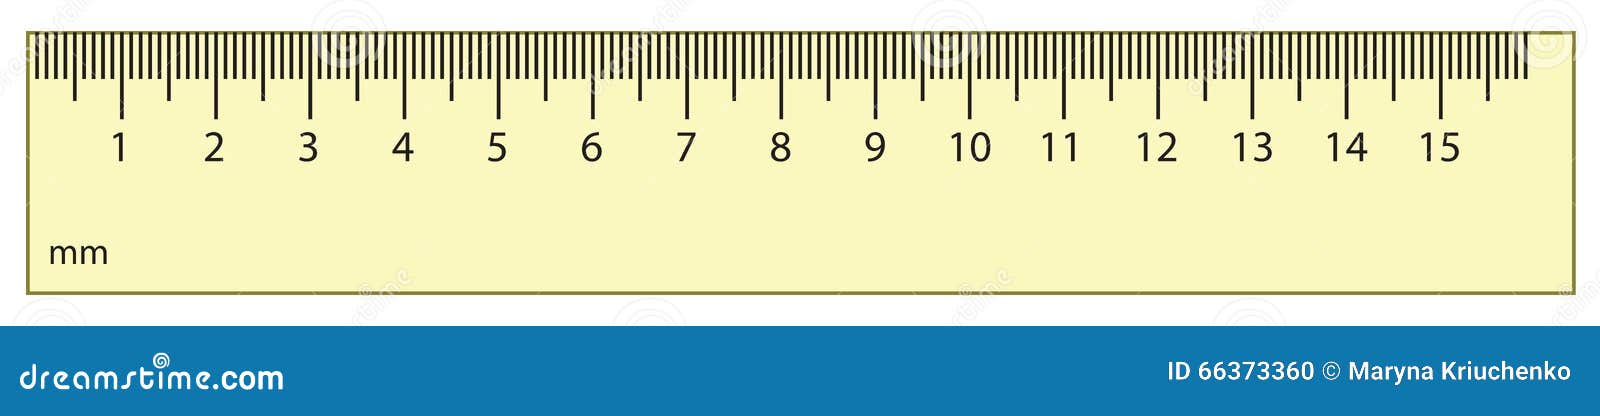 Simple Hand Drawn Plastic Angle Ruler, Office Supply, School